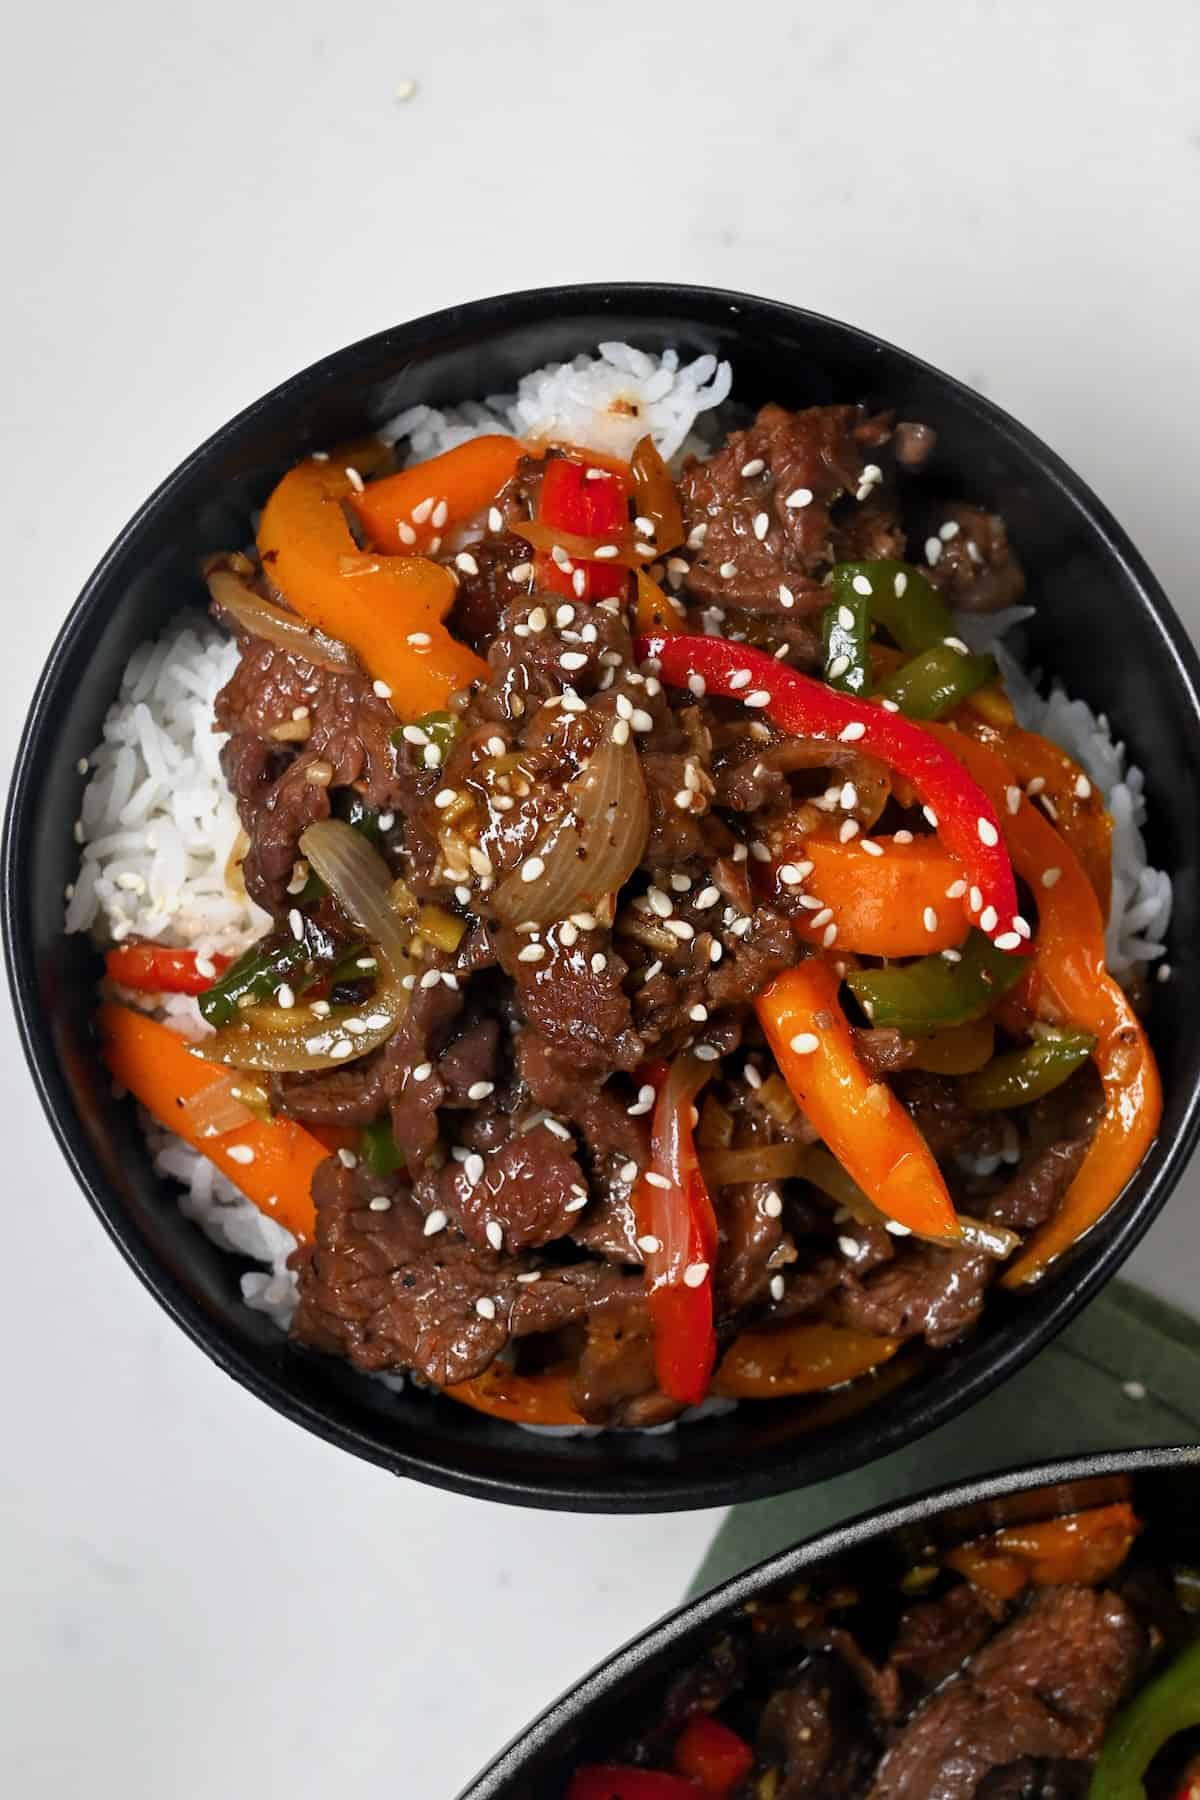 Thinly sliced flank steak is cooked in a flavorful sauce with red and green bell peppers in this pepper steak stir fry. A simple and quick dinner!

